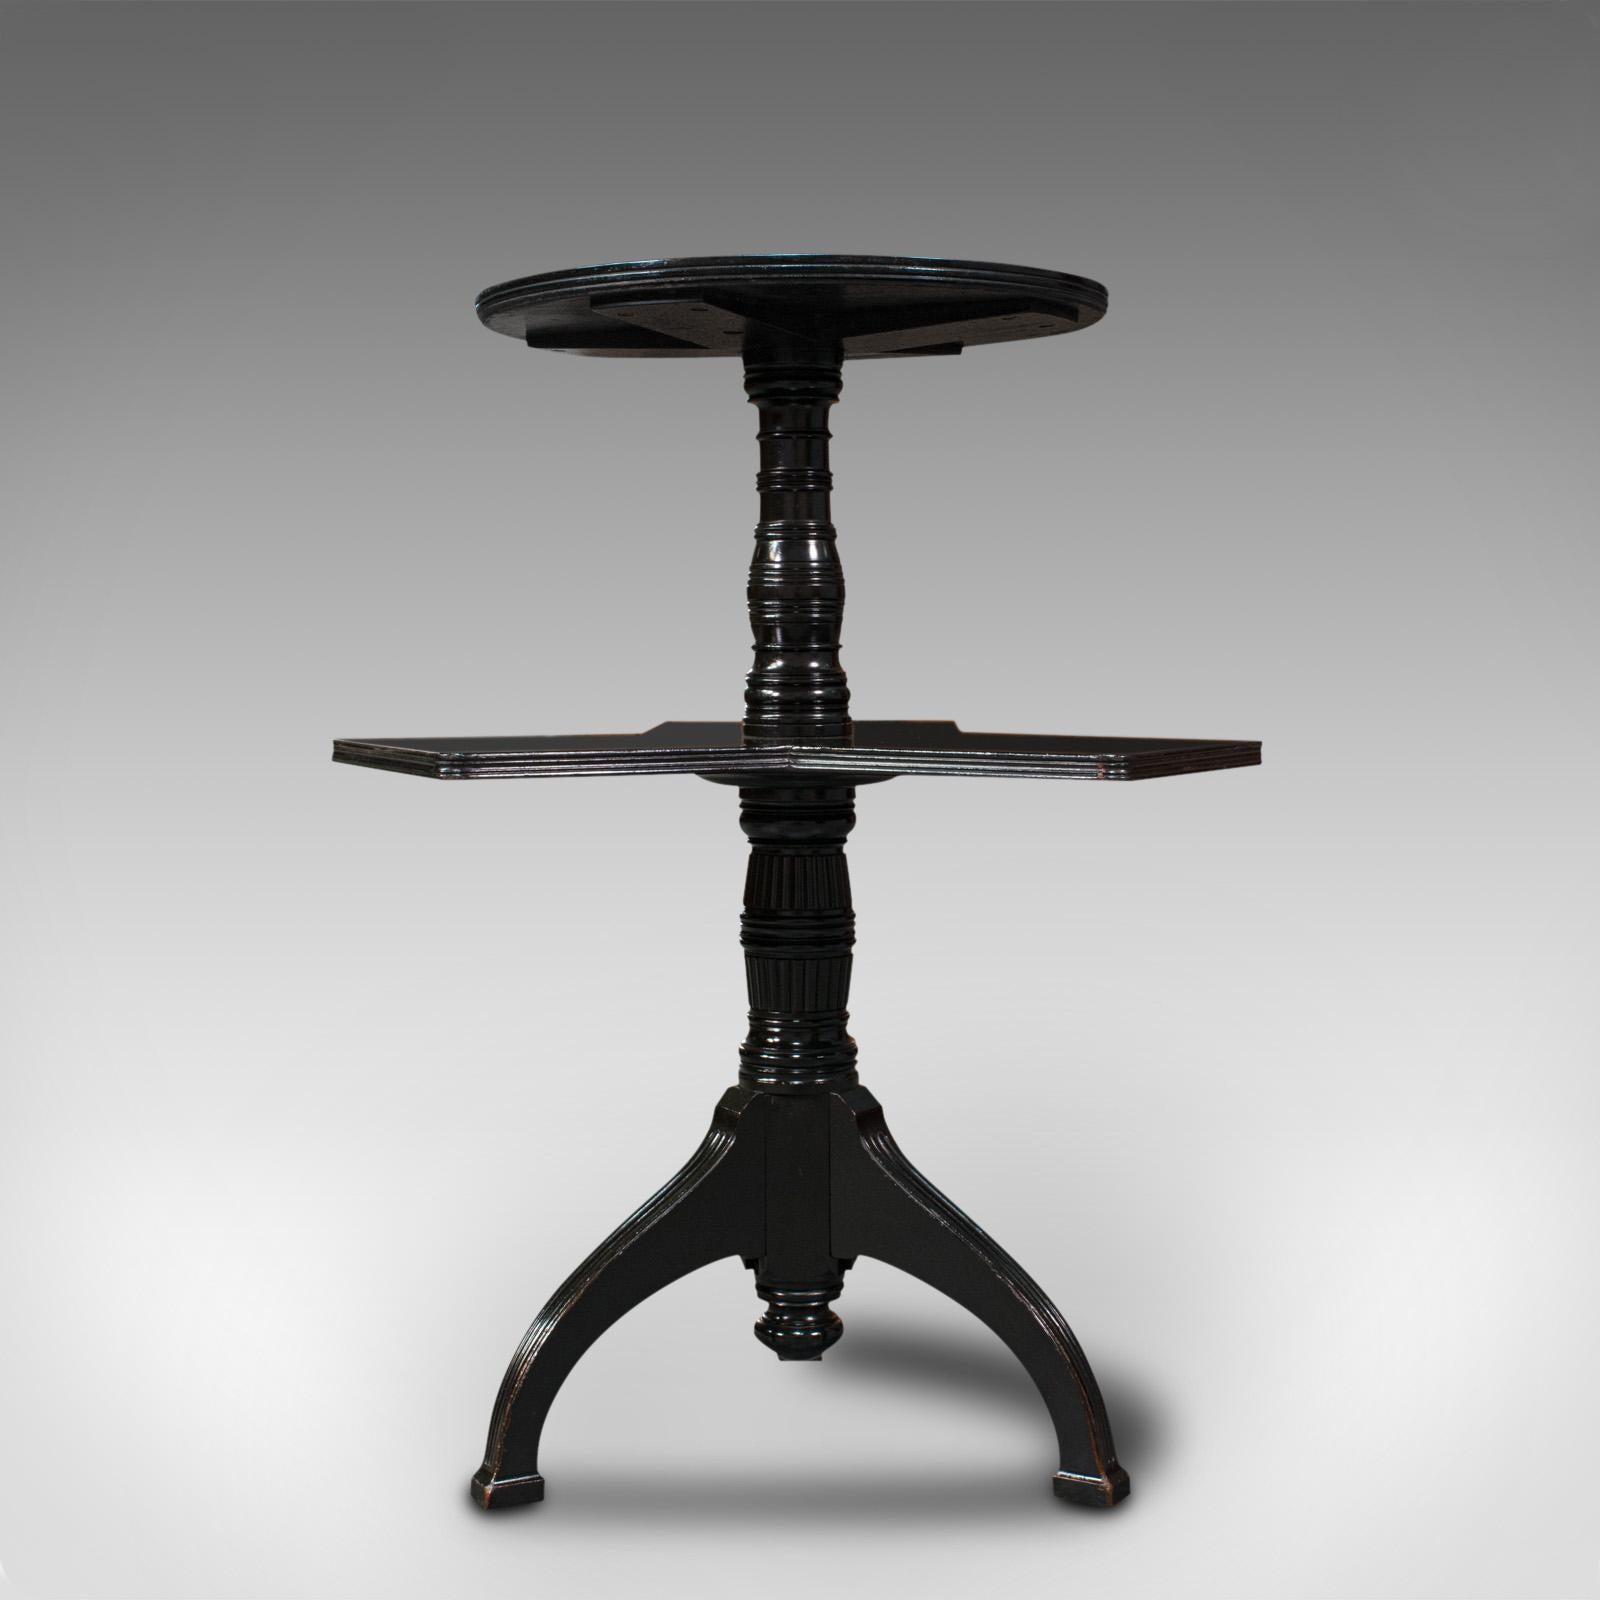 This is an antique afternoon tea table. An English, ebonised mahogany cake stand or occasional table, dating to the Aesthetic period, circa 1880.

Captivates with its pleasingly unusual form
Displaying a desirable aged patina and in good